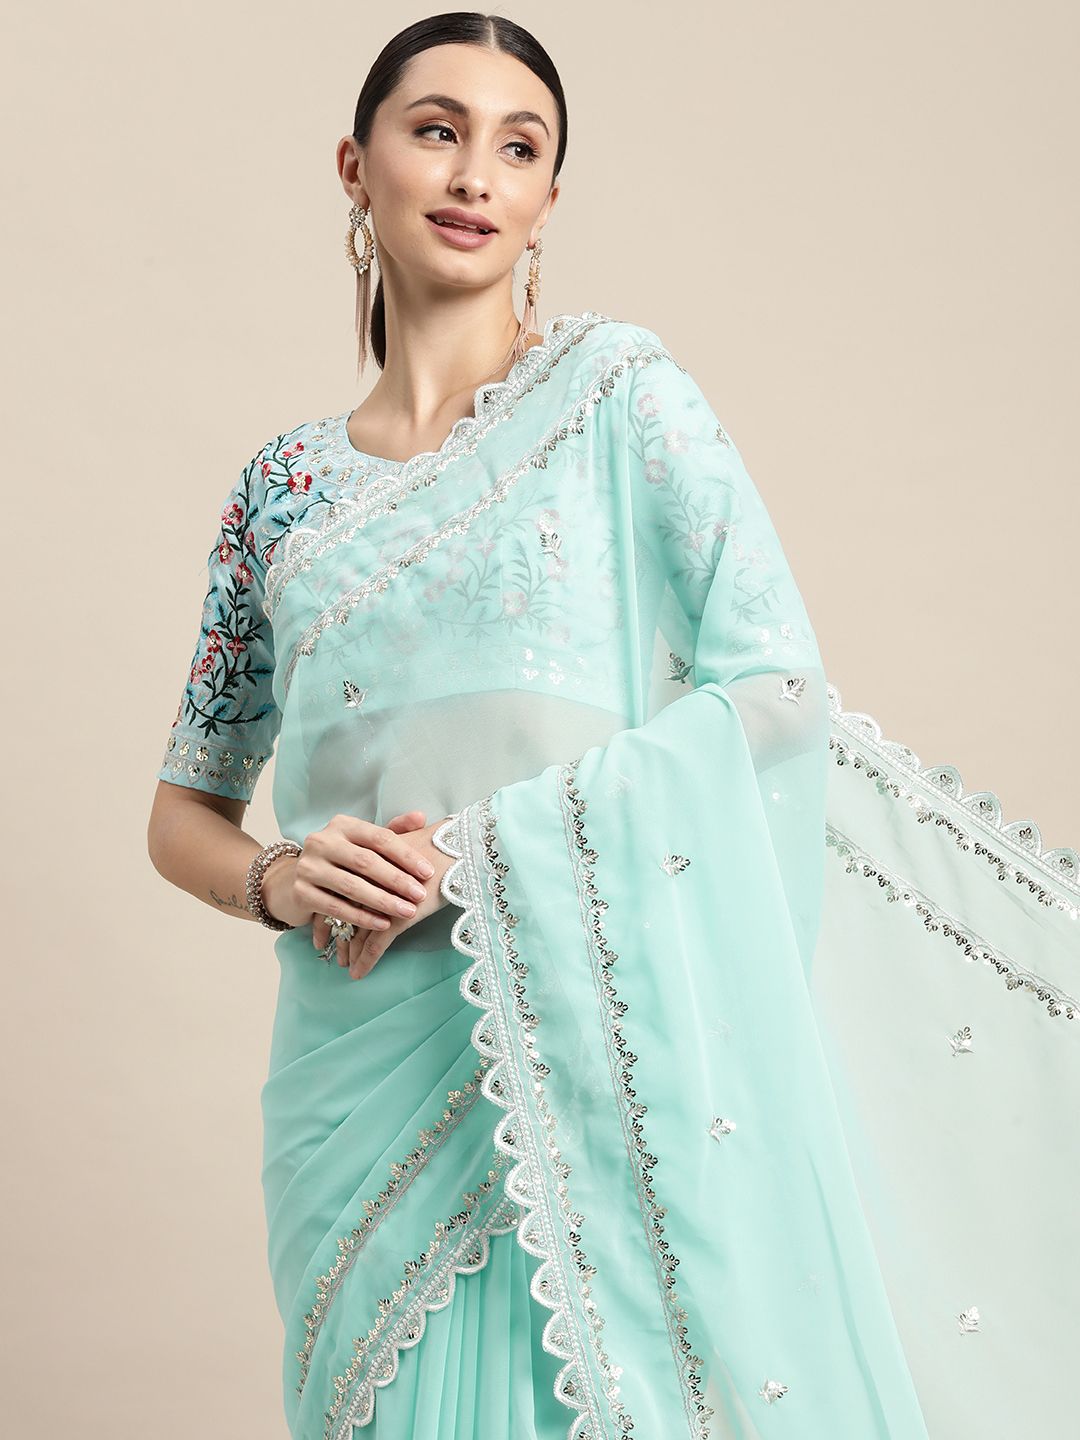 VAIRAGEE Turquoise Blue Floral Embroidered Saree Price in India